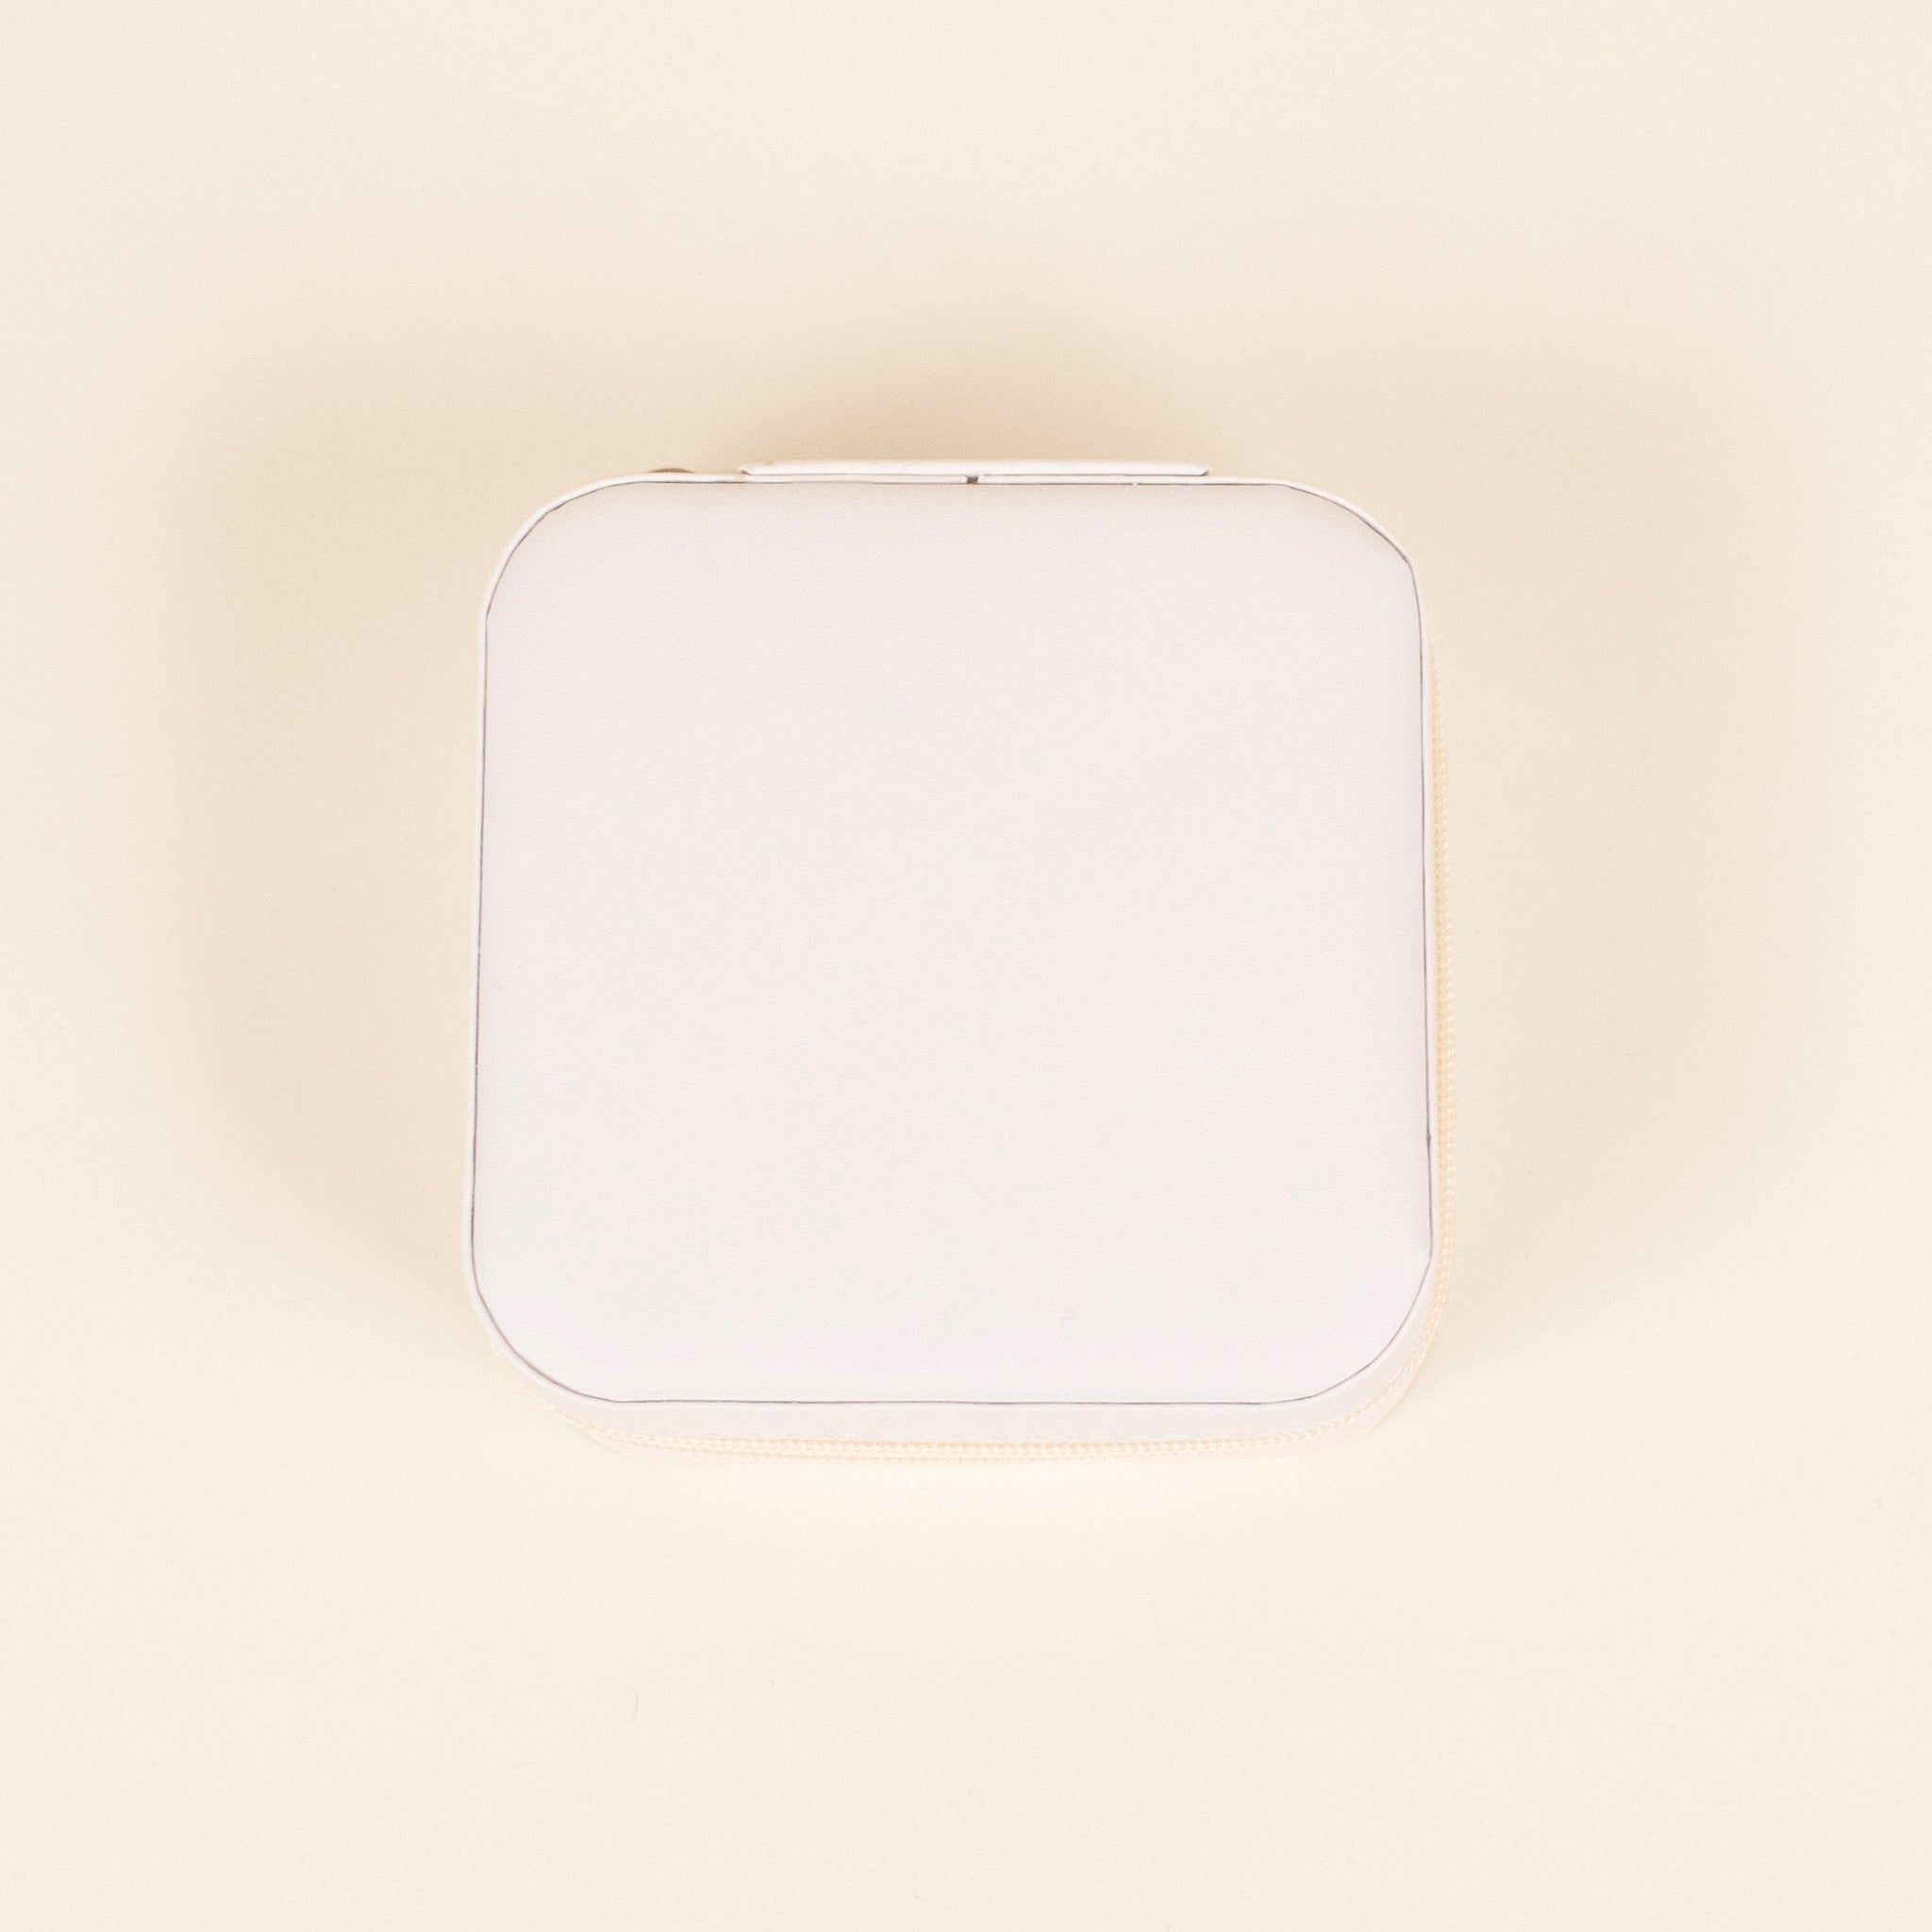 Back view of the White Jewelry Box showing a smooth finish in white faux leather.